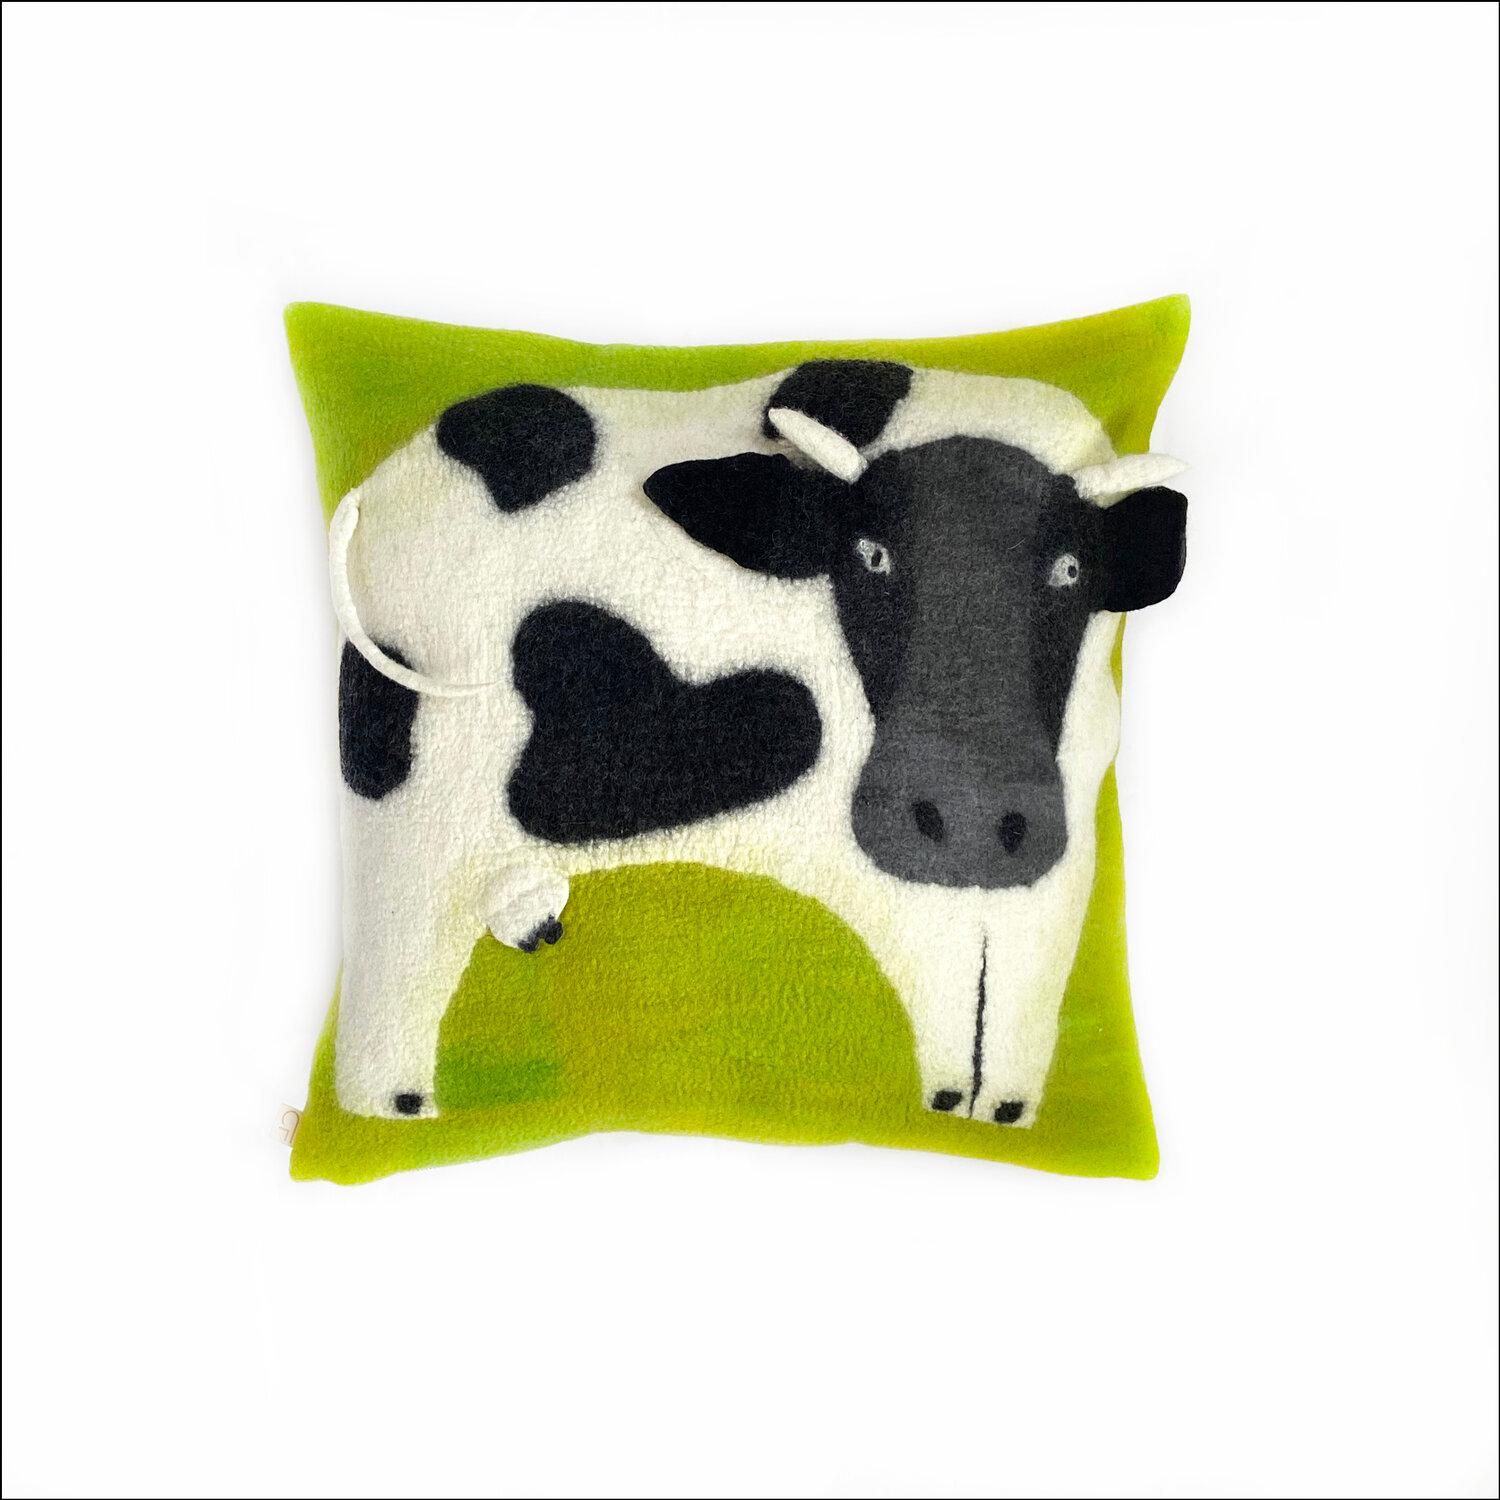 South African Contemporary Handmade Wool Pillow, Cow Image on Lime Background